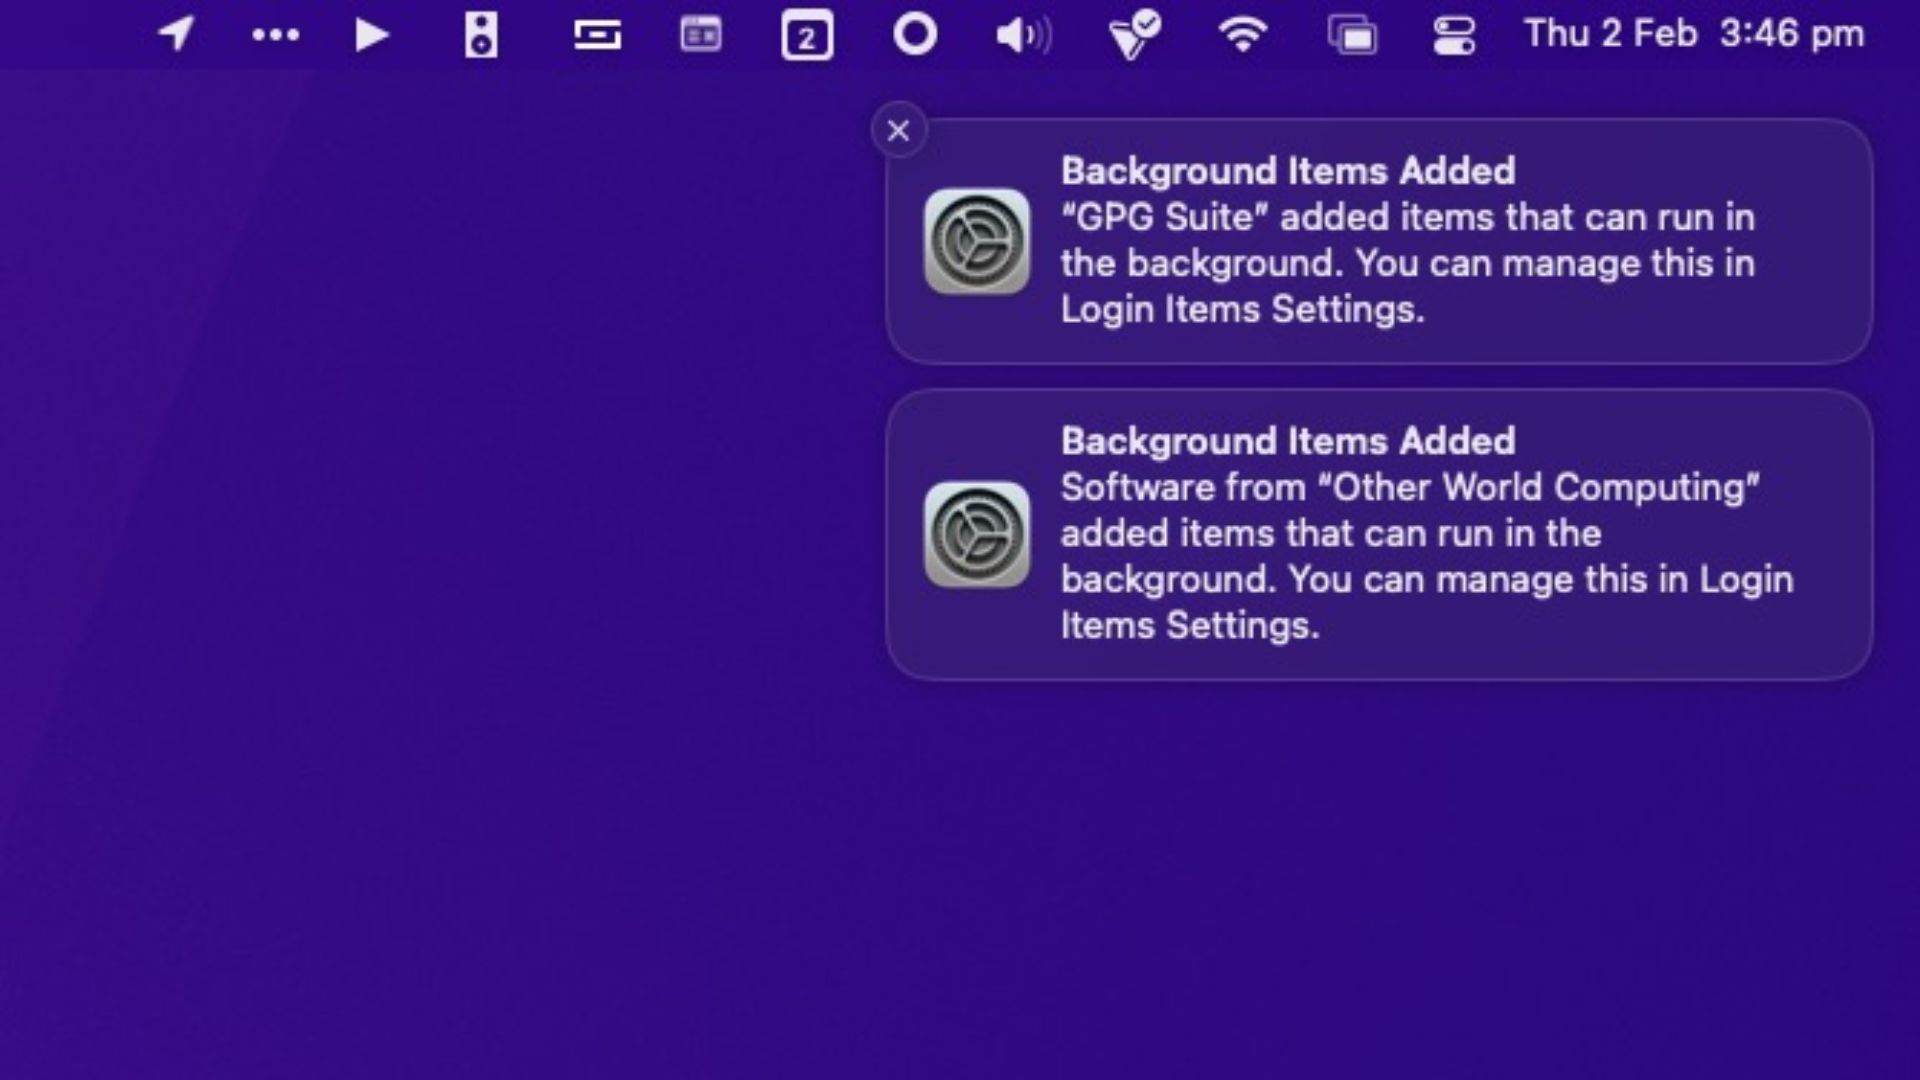 macOS Ventura Bug Spits Out Perpetual 'Background Items Added' Notifications at Login, Here's a Potential Fix - macrumors.com